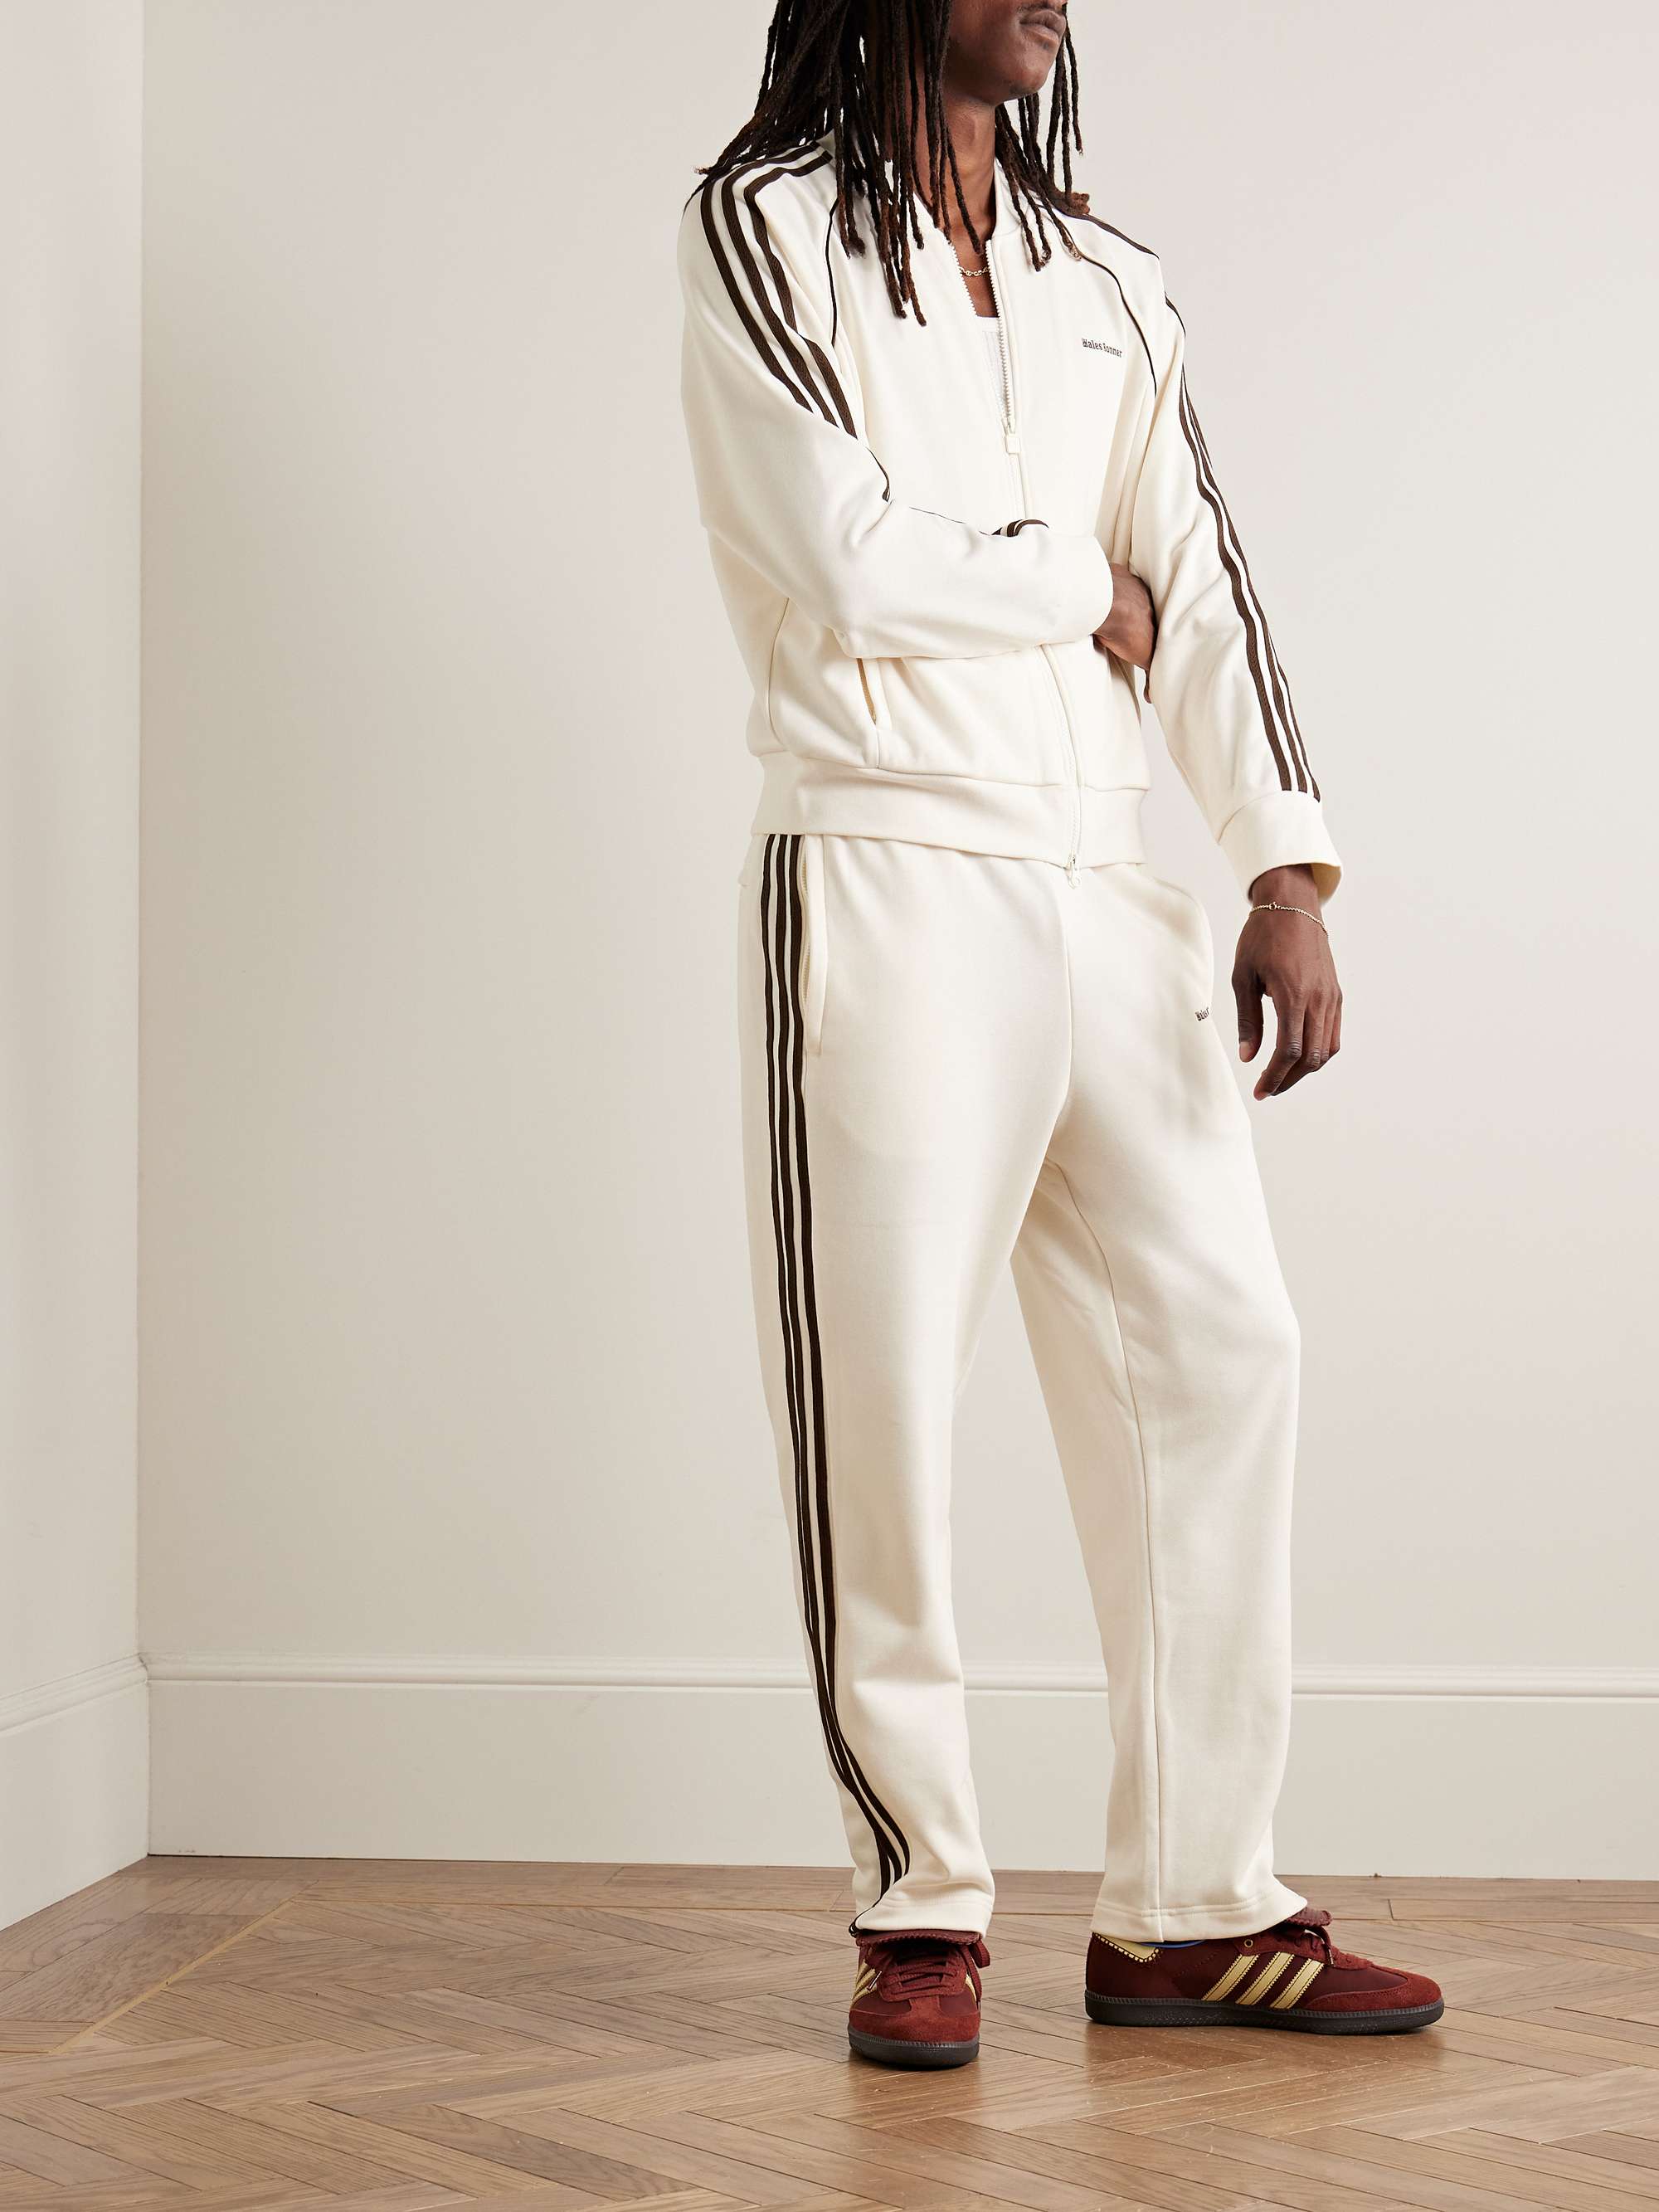 + Wales Bonner mesh-trimmed recycled stretch-knit track jacket